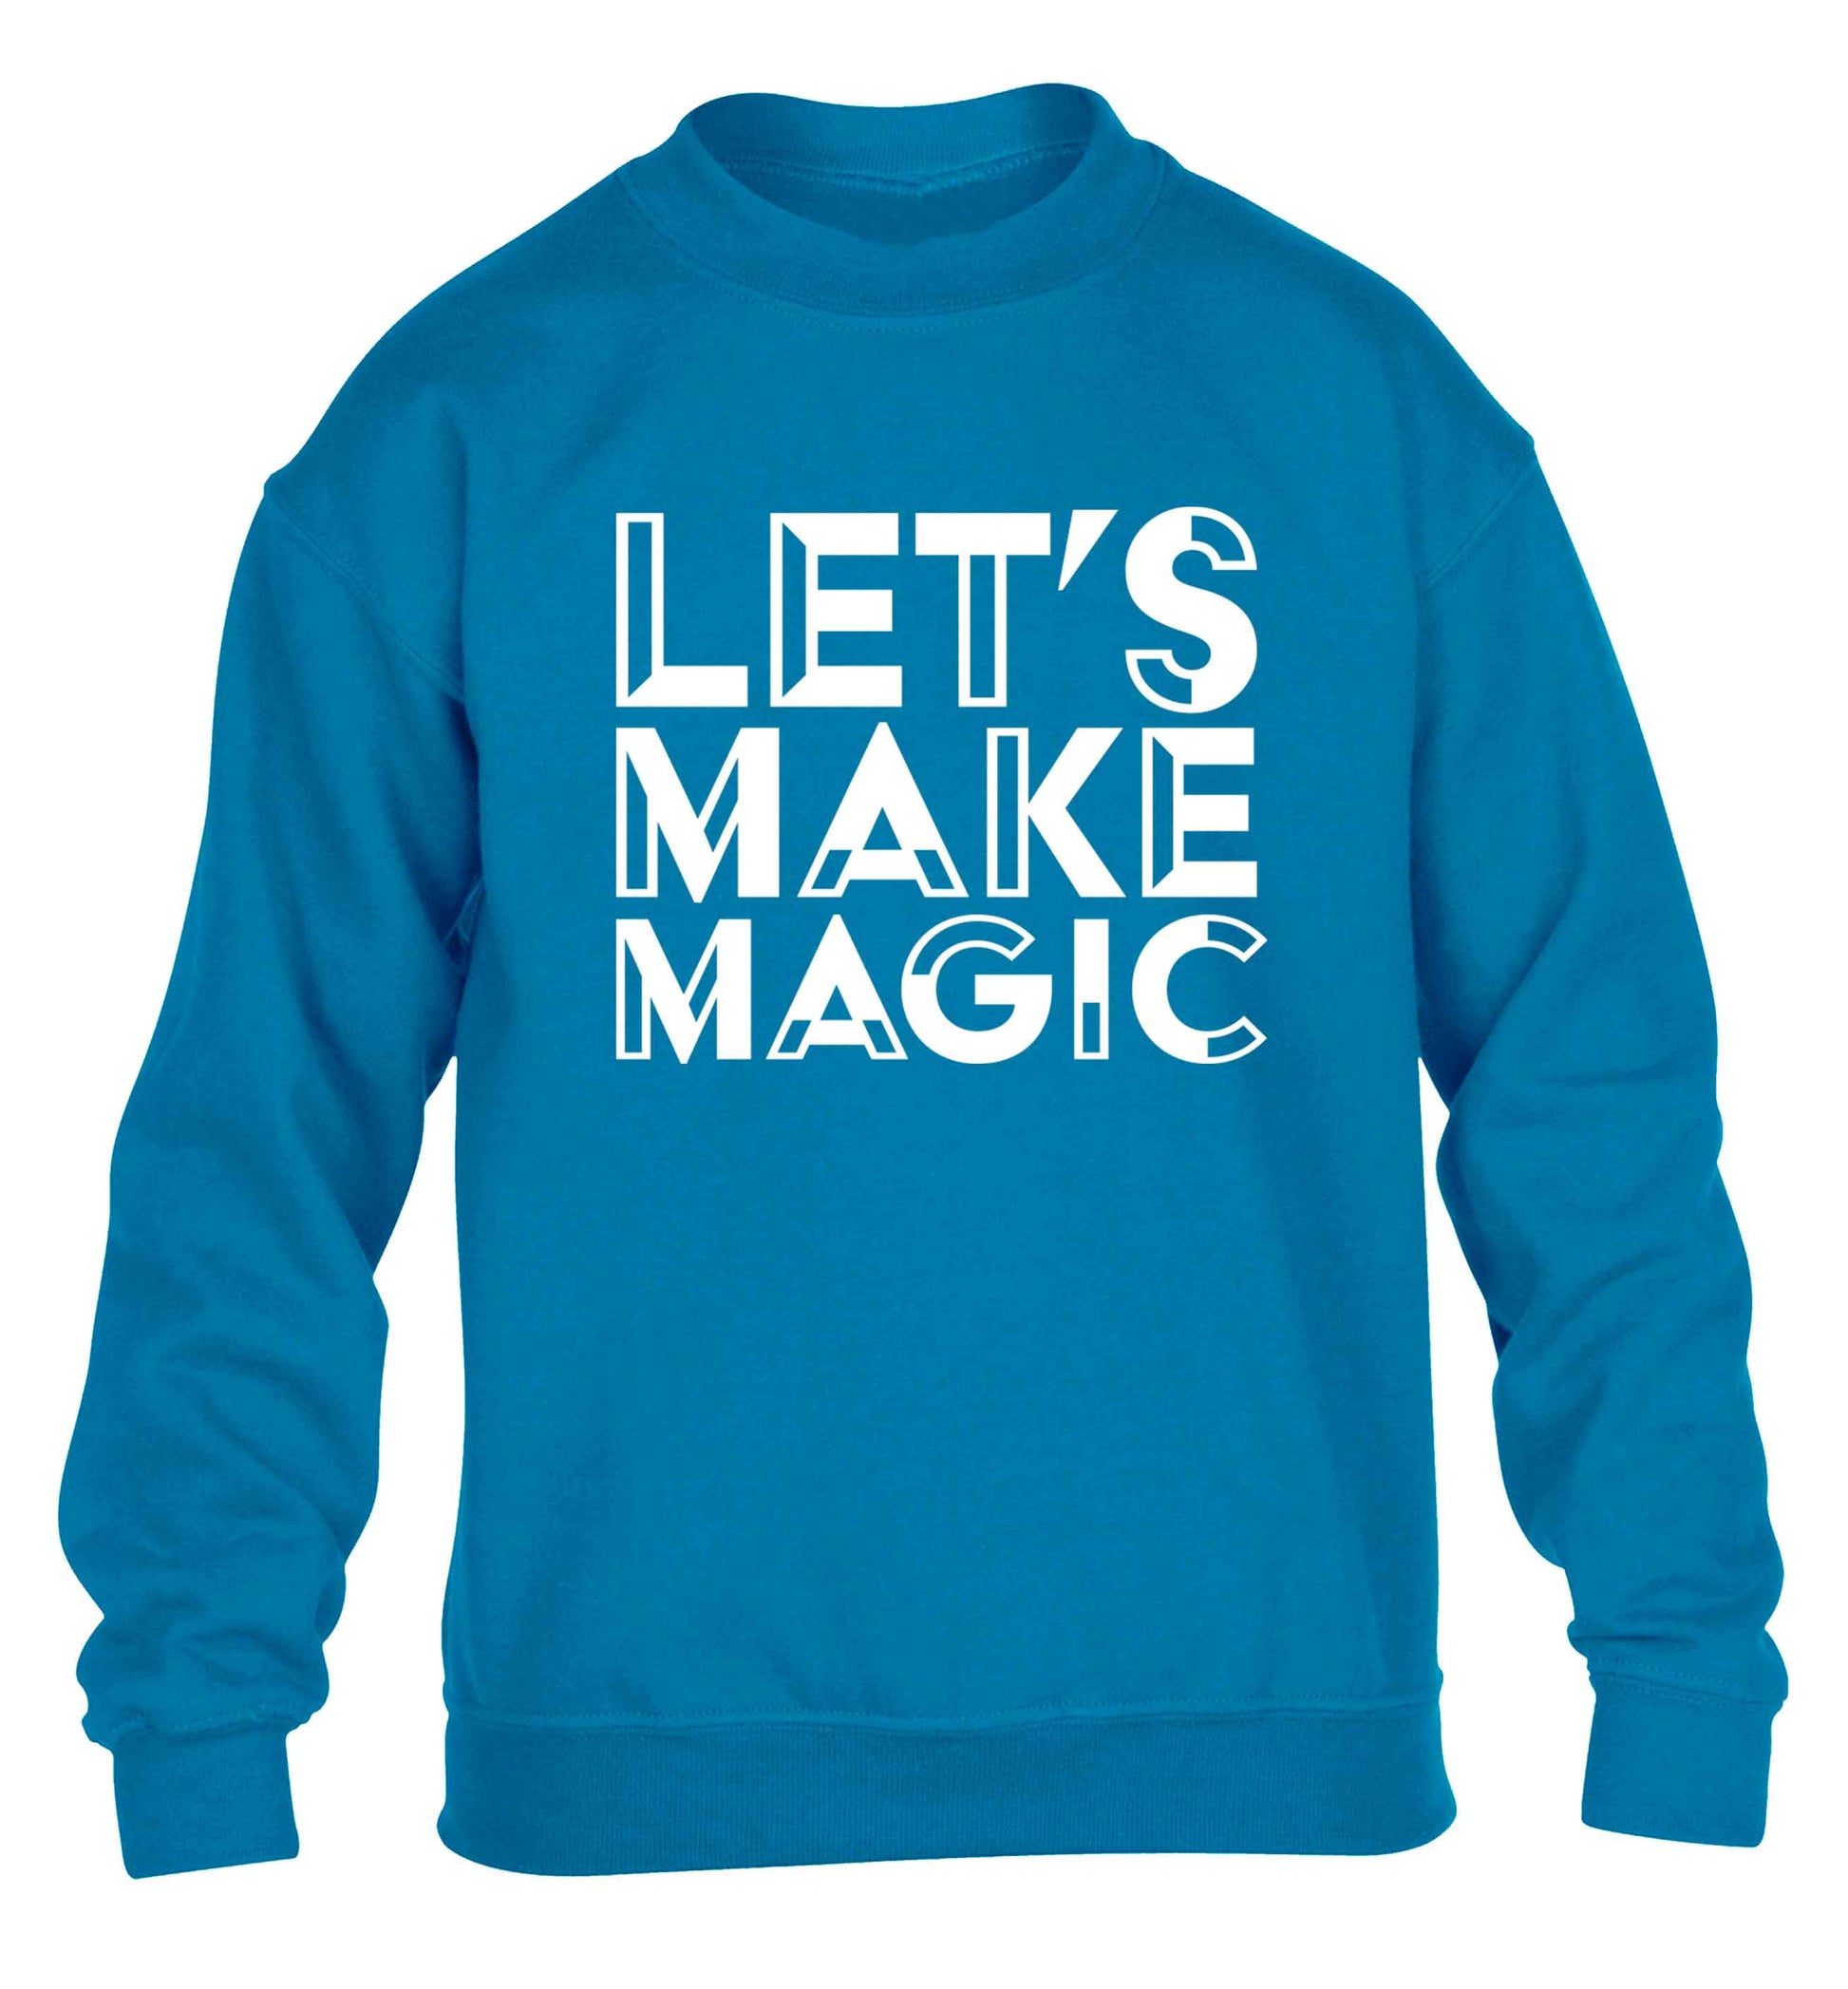 Let's make magic children's blue sweater 12-13 Years